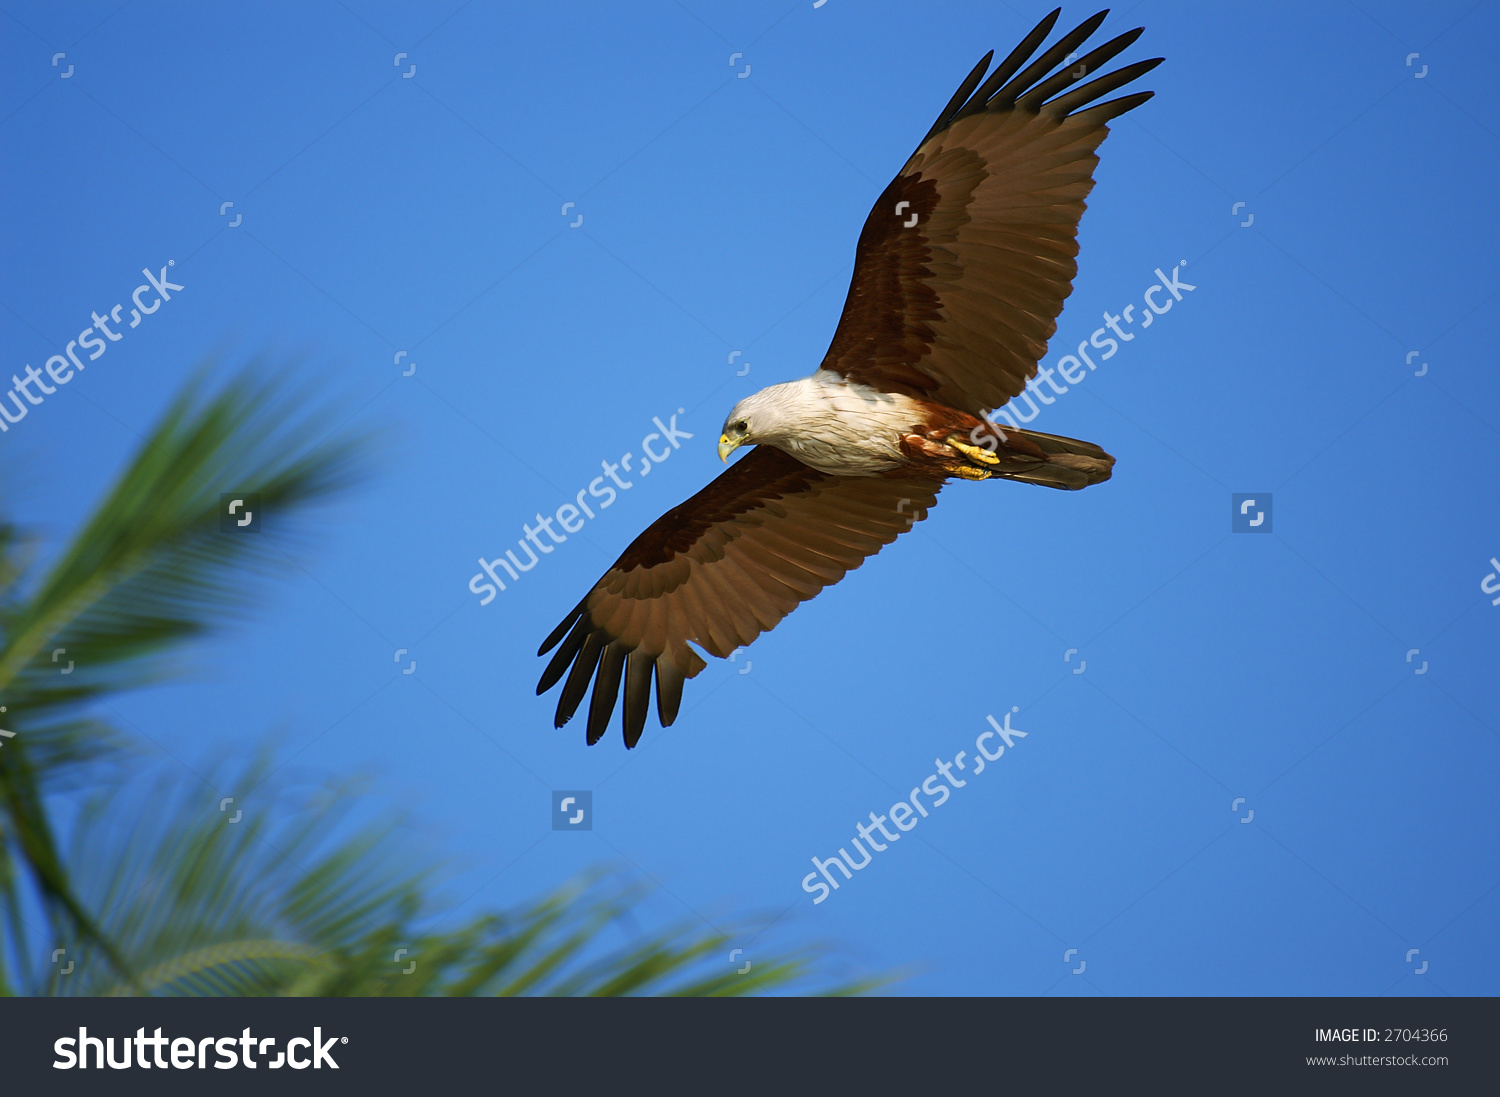 White-bellied Sea Eagle clipart #9, Download drawings